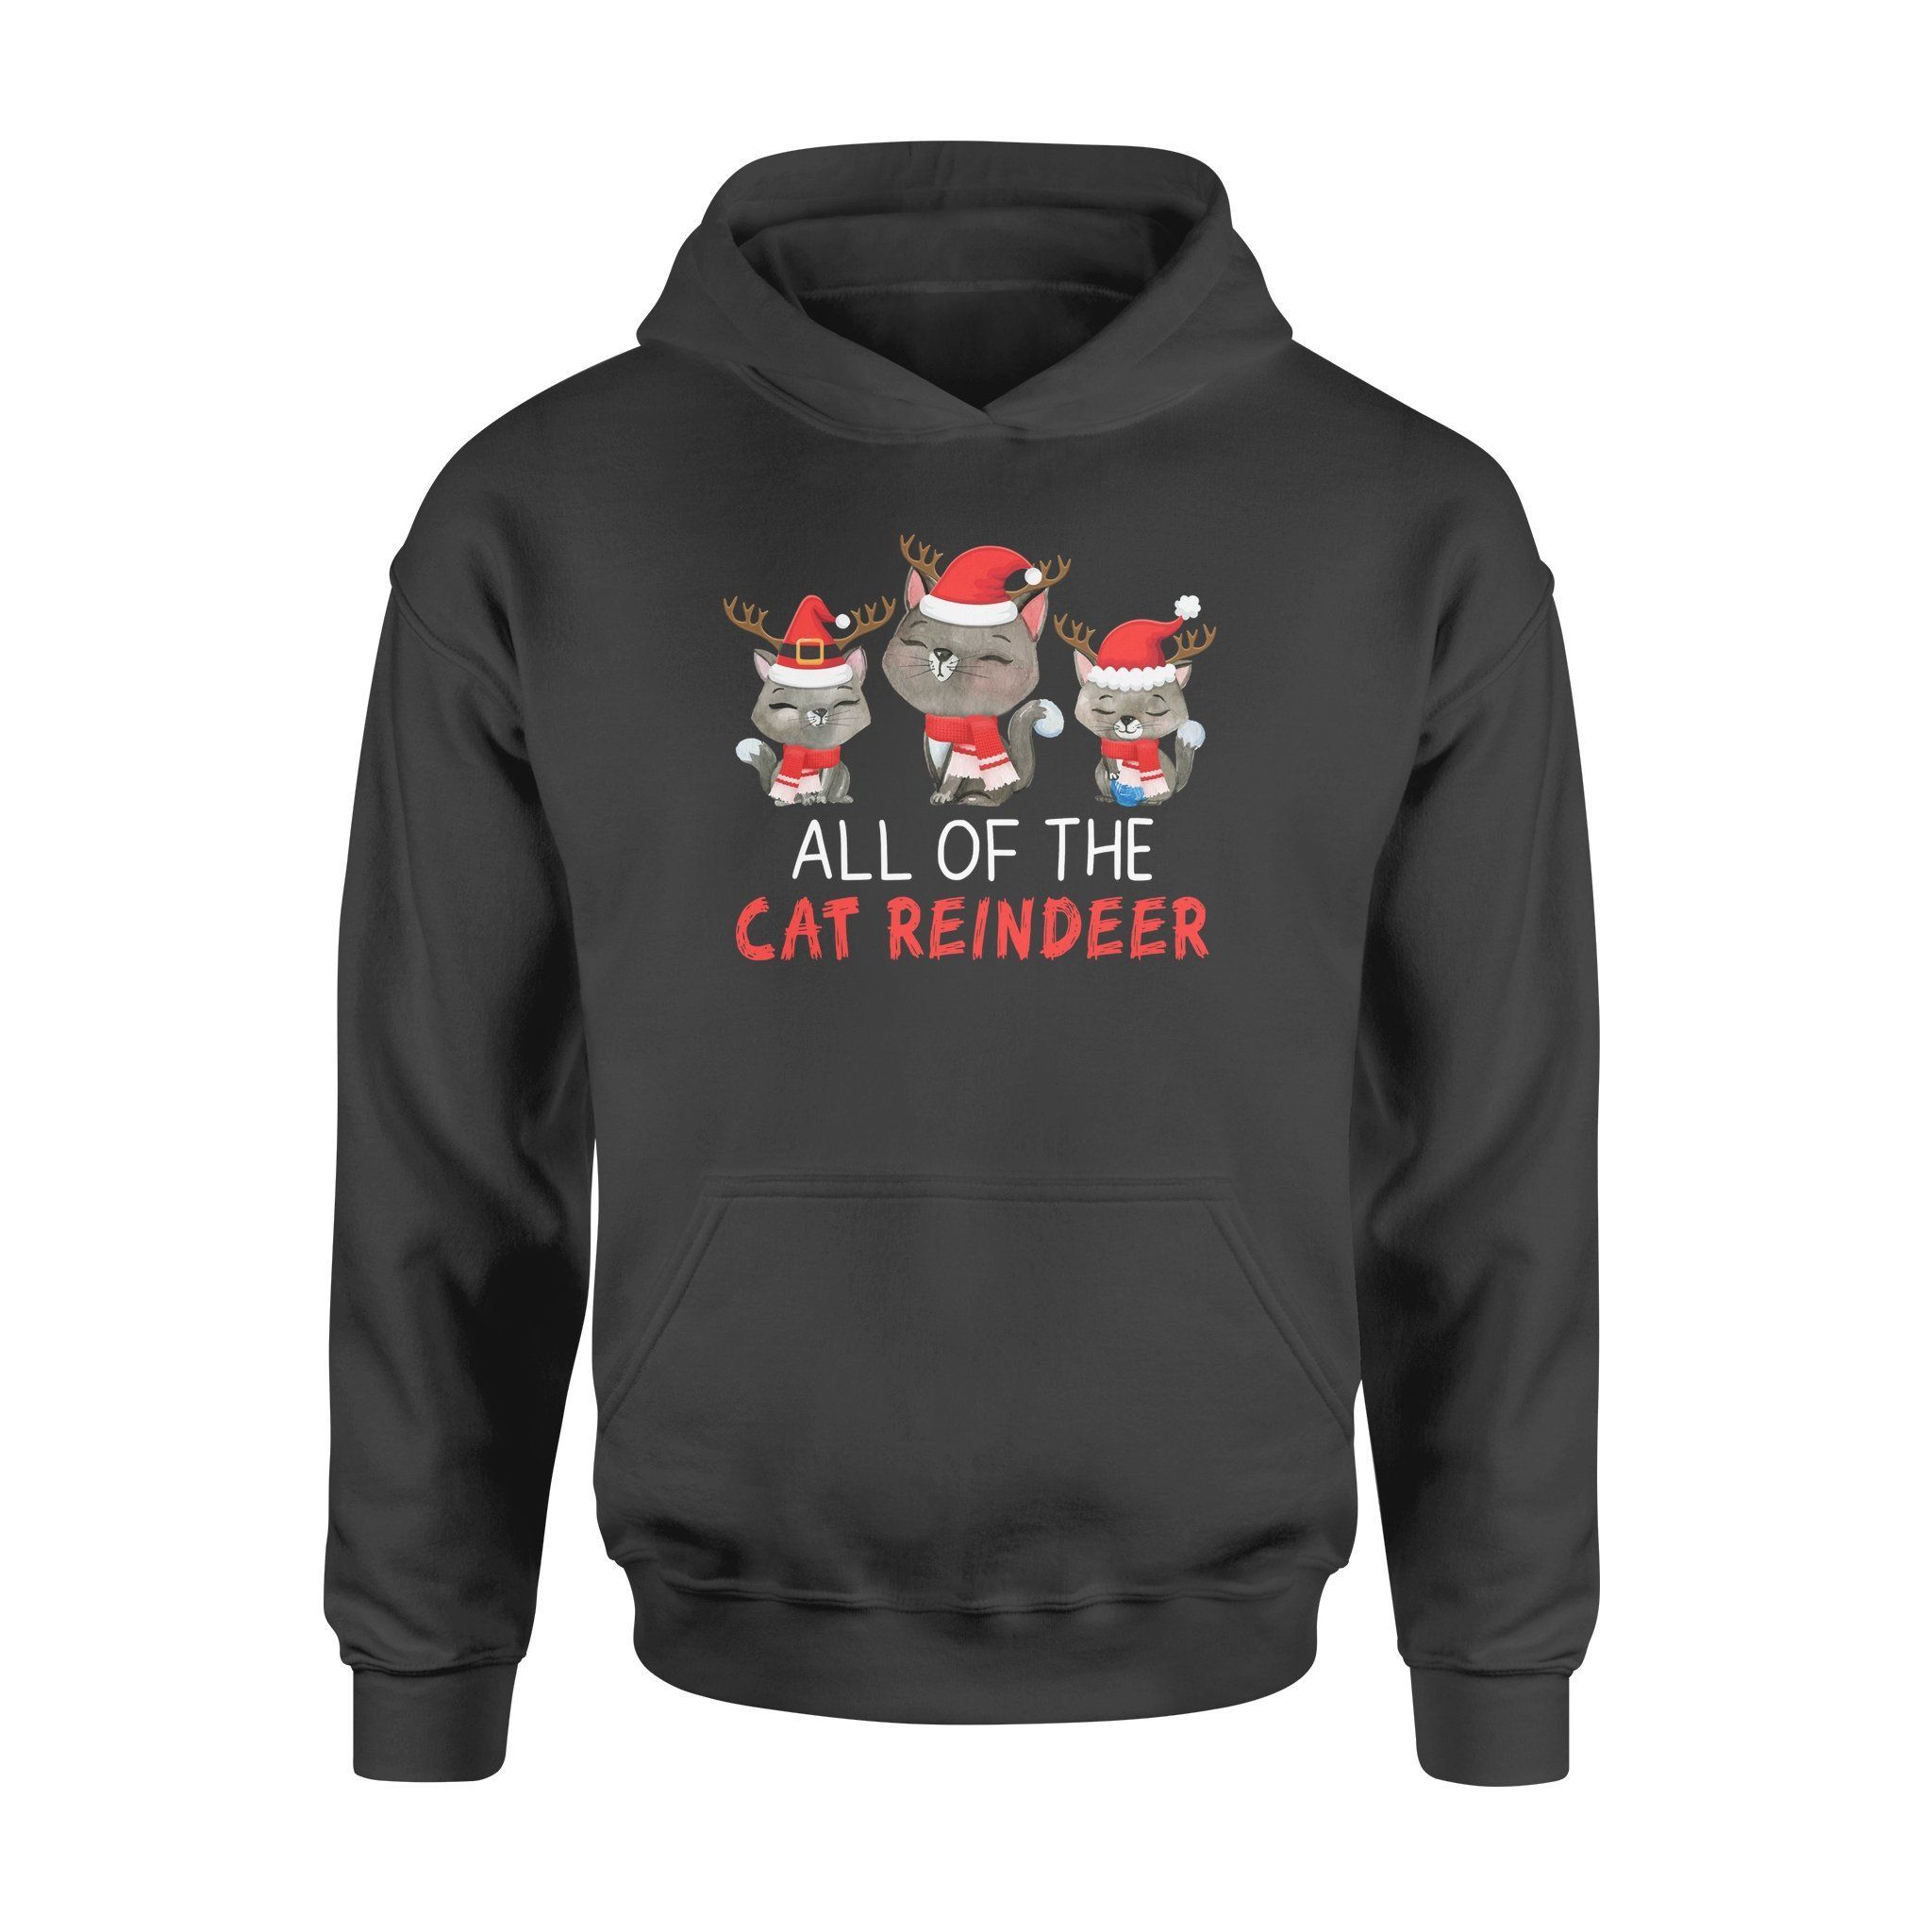 Besteever All Of The Cat Reindeer Shirt Gift For Couple, Friend, Family ï¿½ Premium 3D Hoodie For Men Women All Over 3D Printed Hoodie